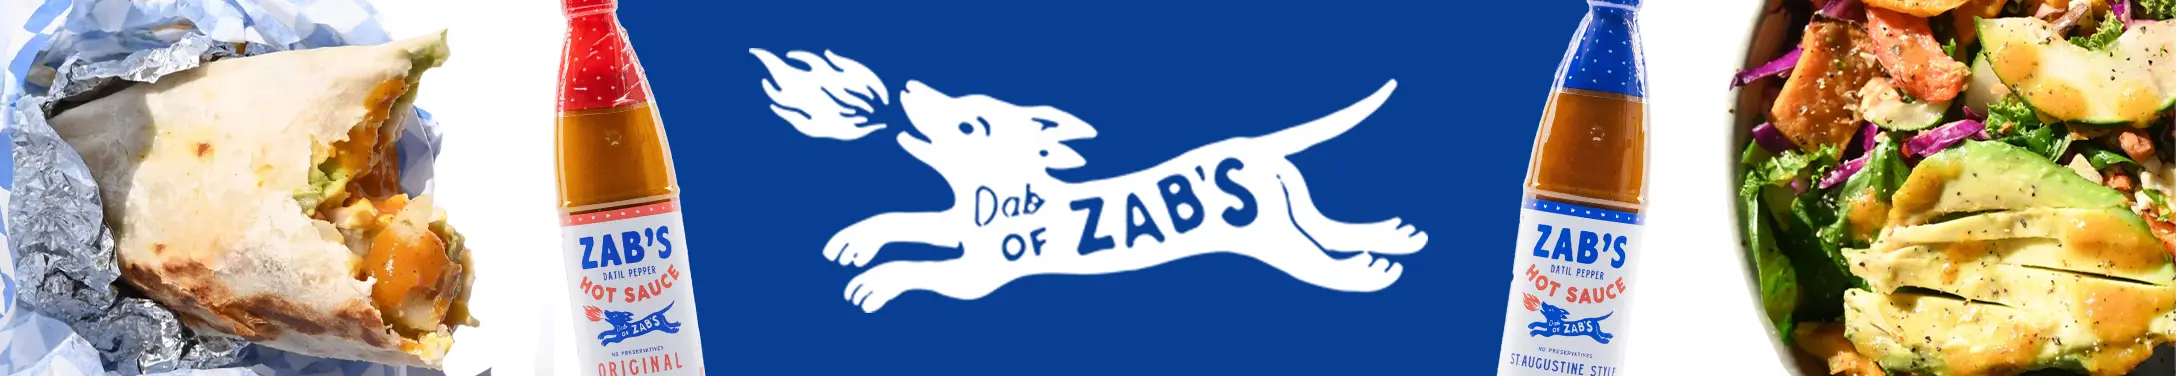 dab of zabs logo next to product and prepared foods